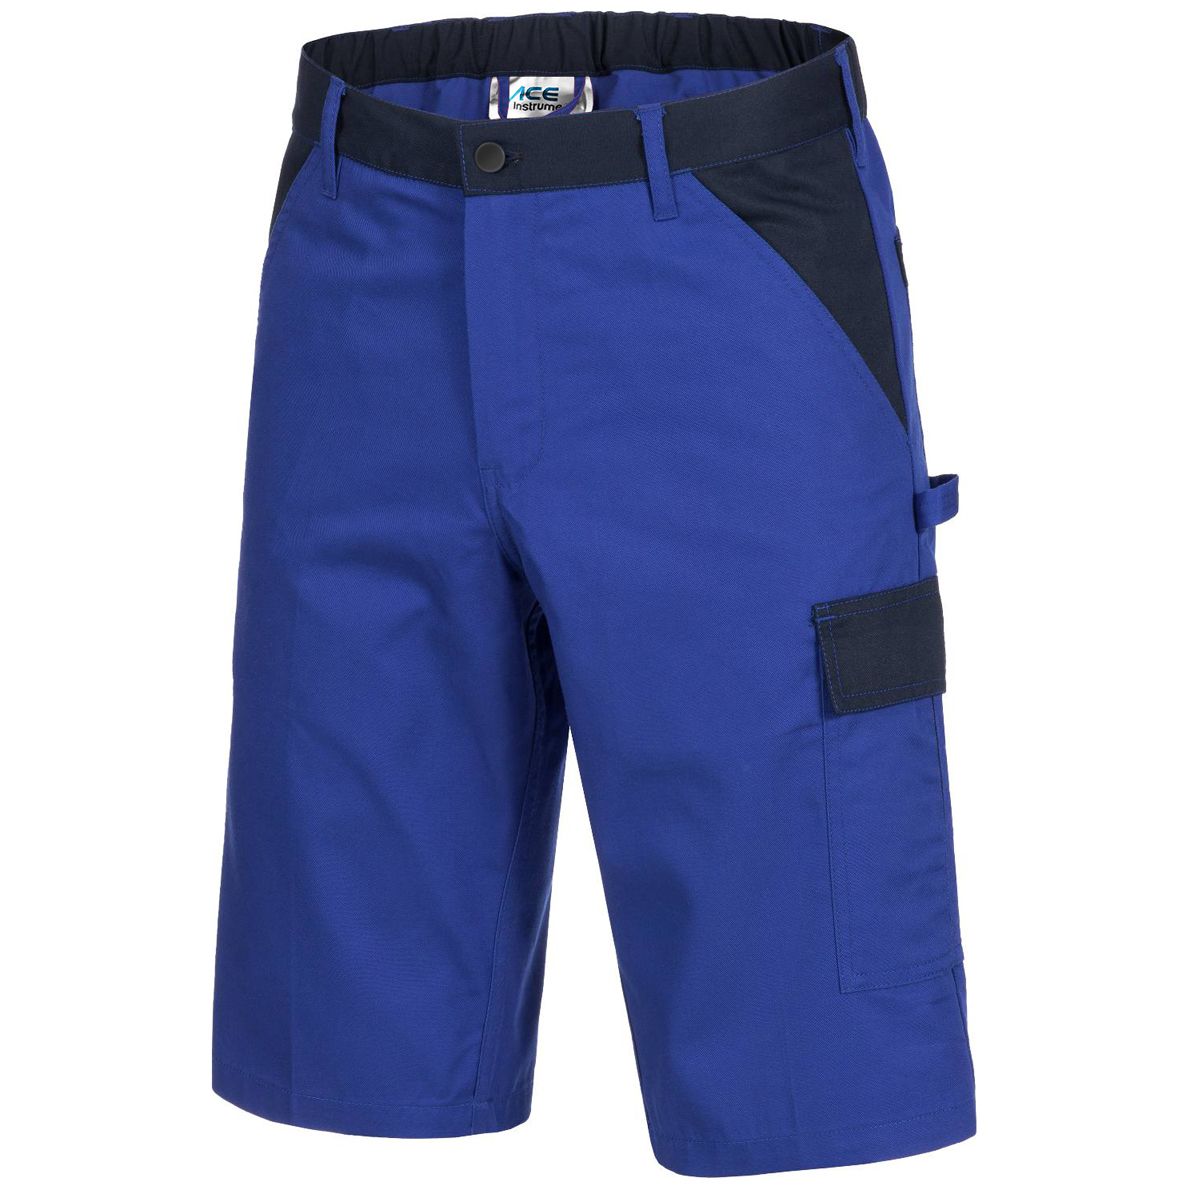 ACE Handyman Men's Work Trousers - Cargo Shorts for Work - Blue - 48